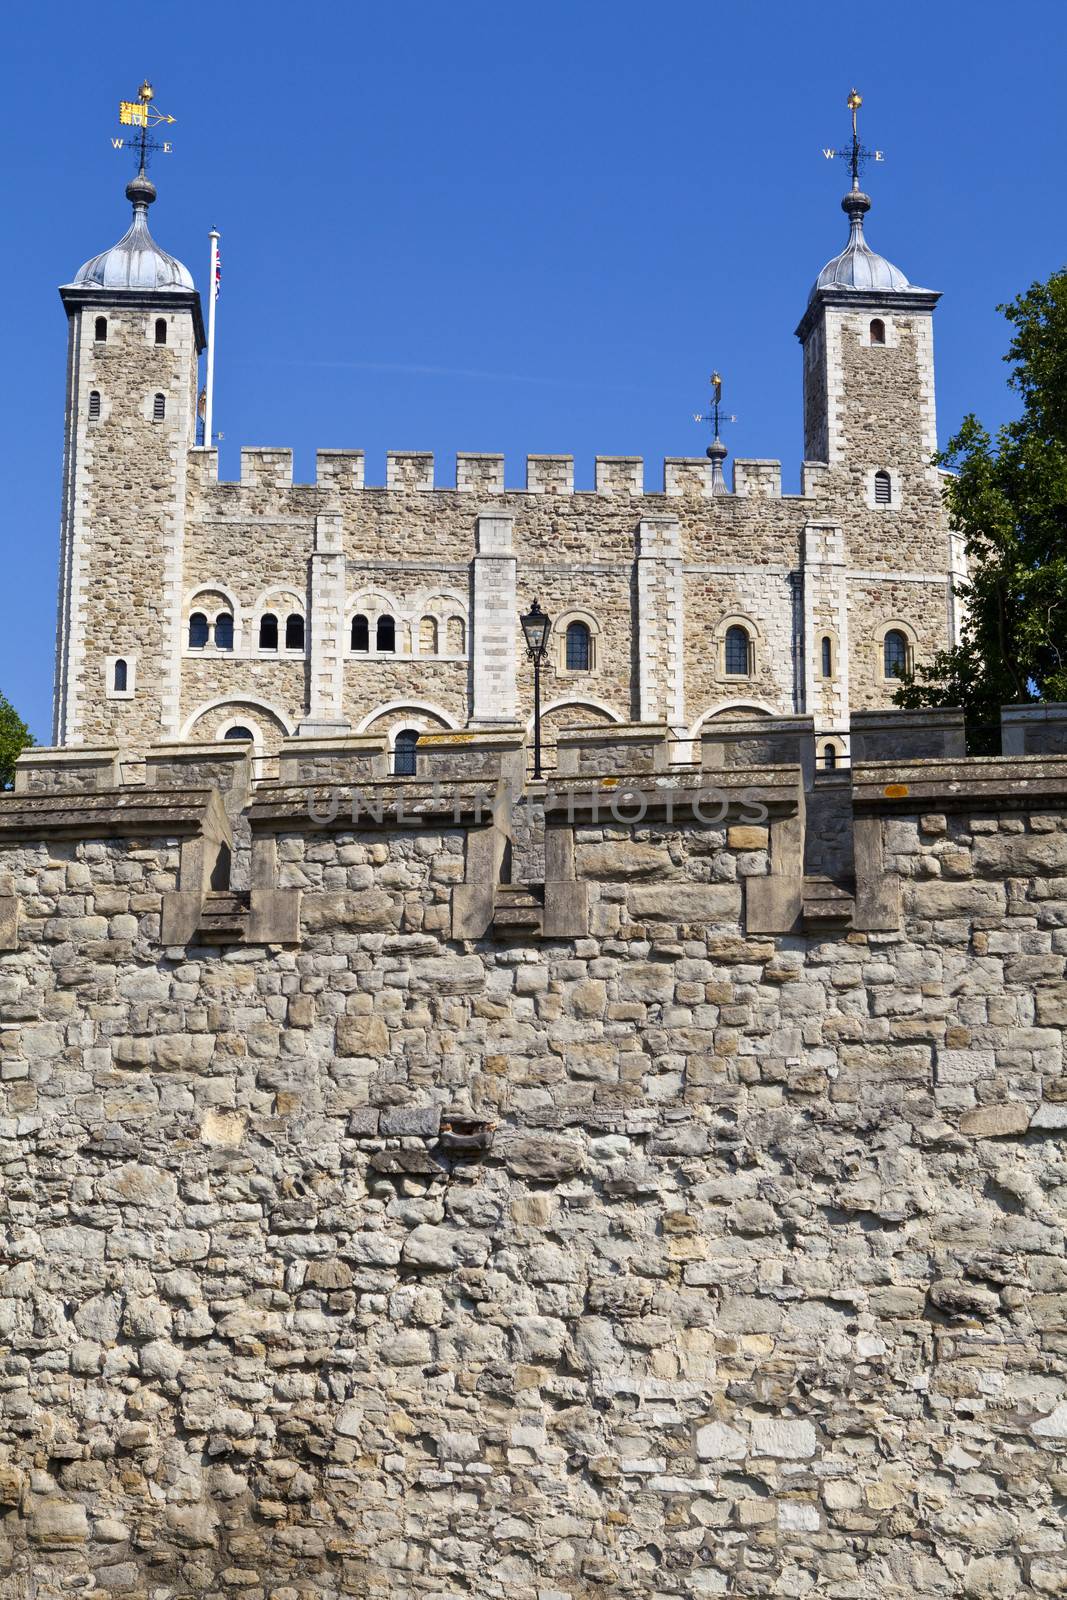 The Tower of London on a Summer's day.